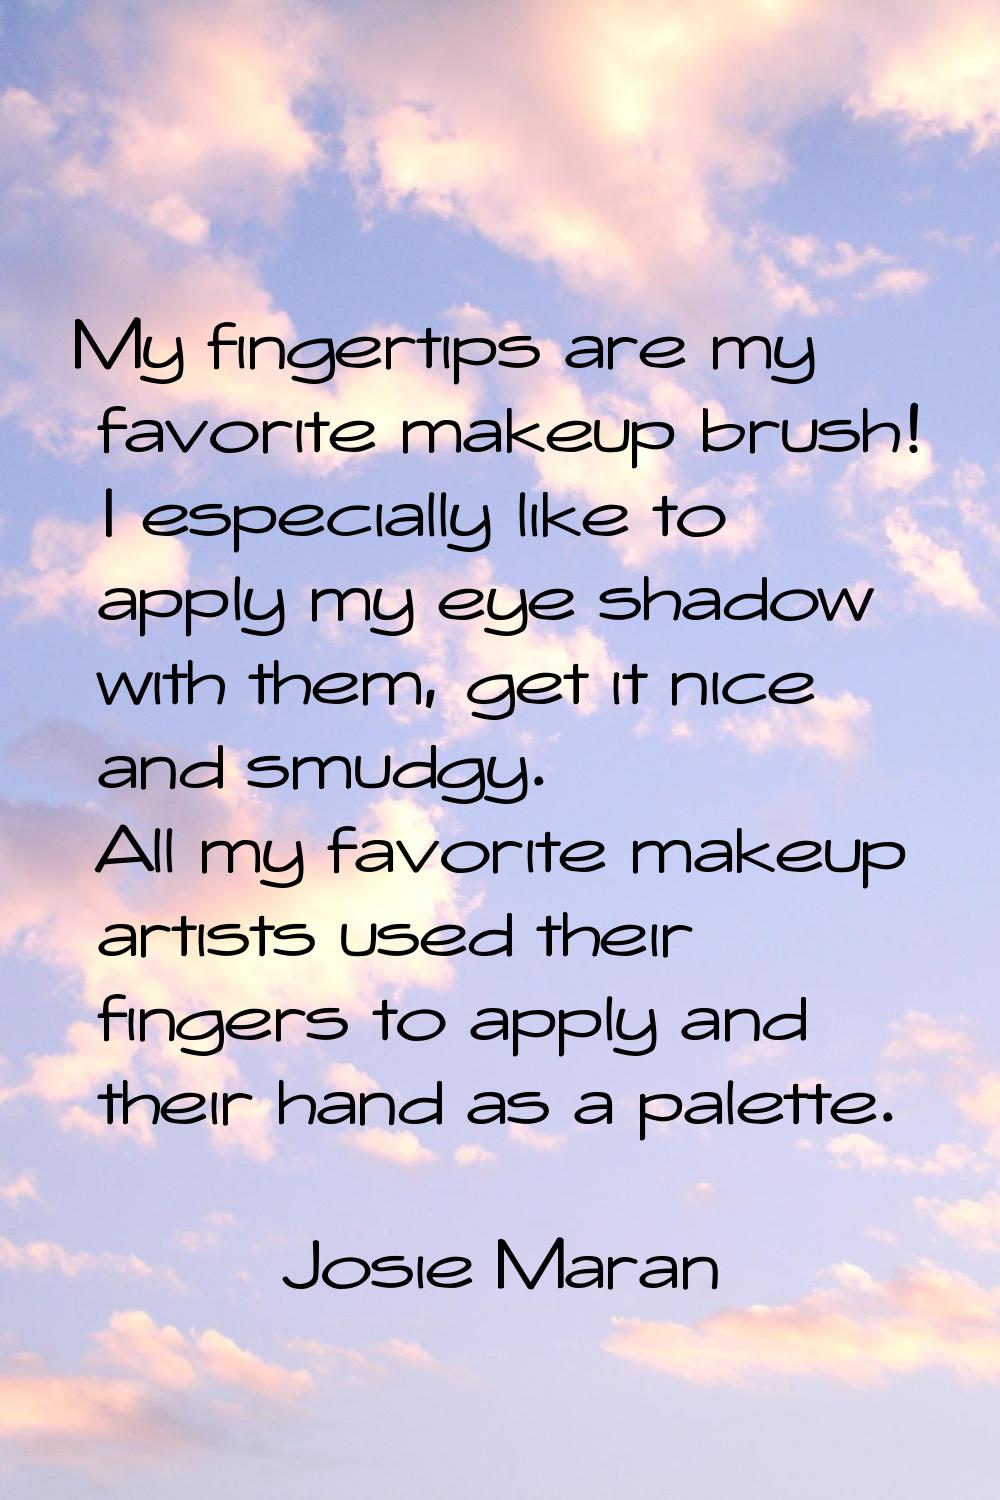 My fingertips are my favorite makeup brush! I especially like to apply my eye shadow with them, get